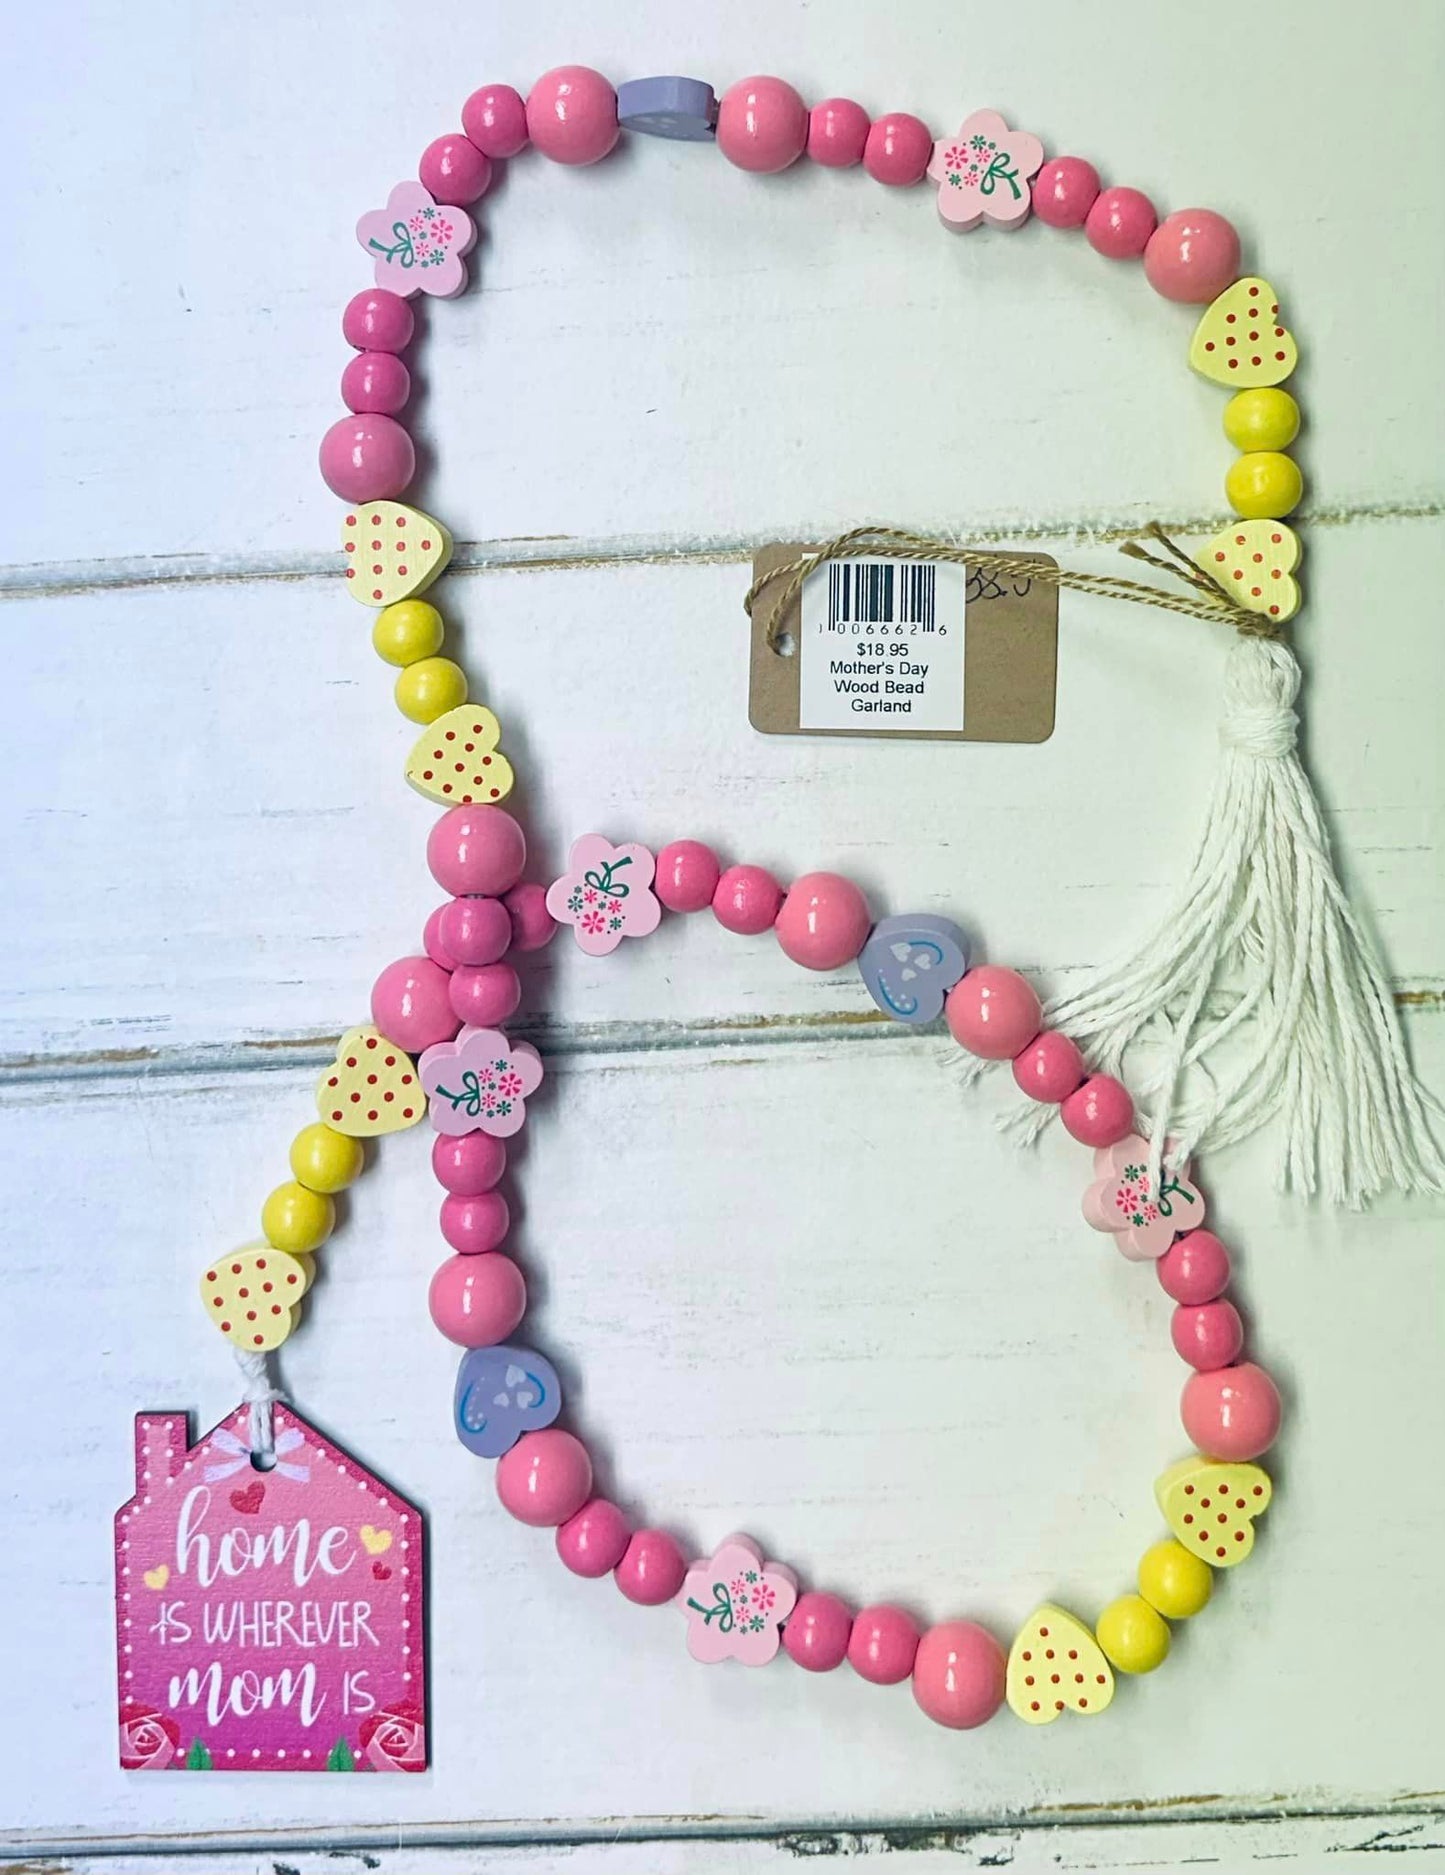 Mother's Day Wood Bead Garland